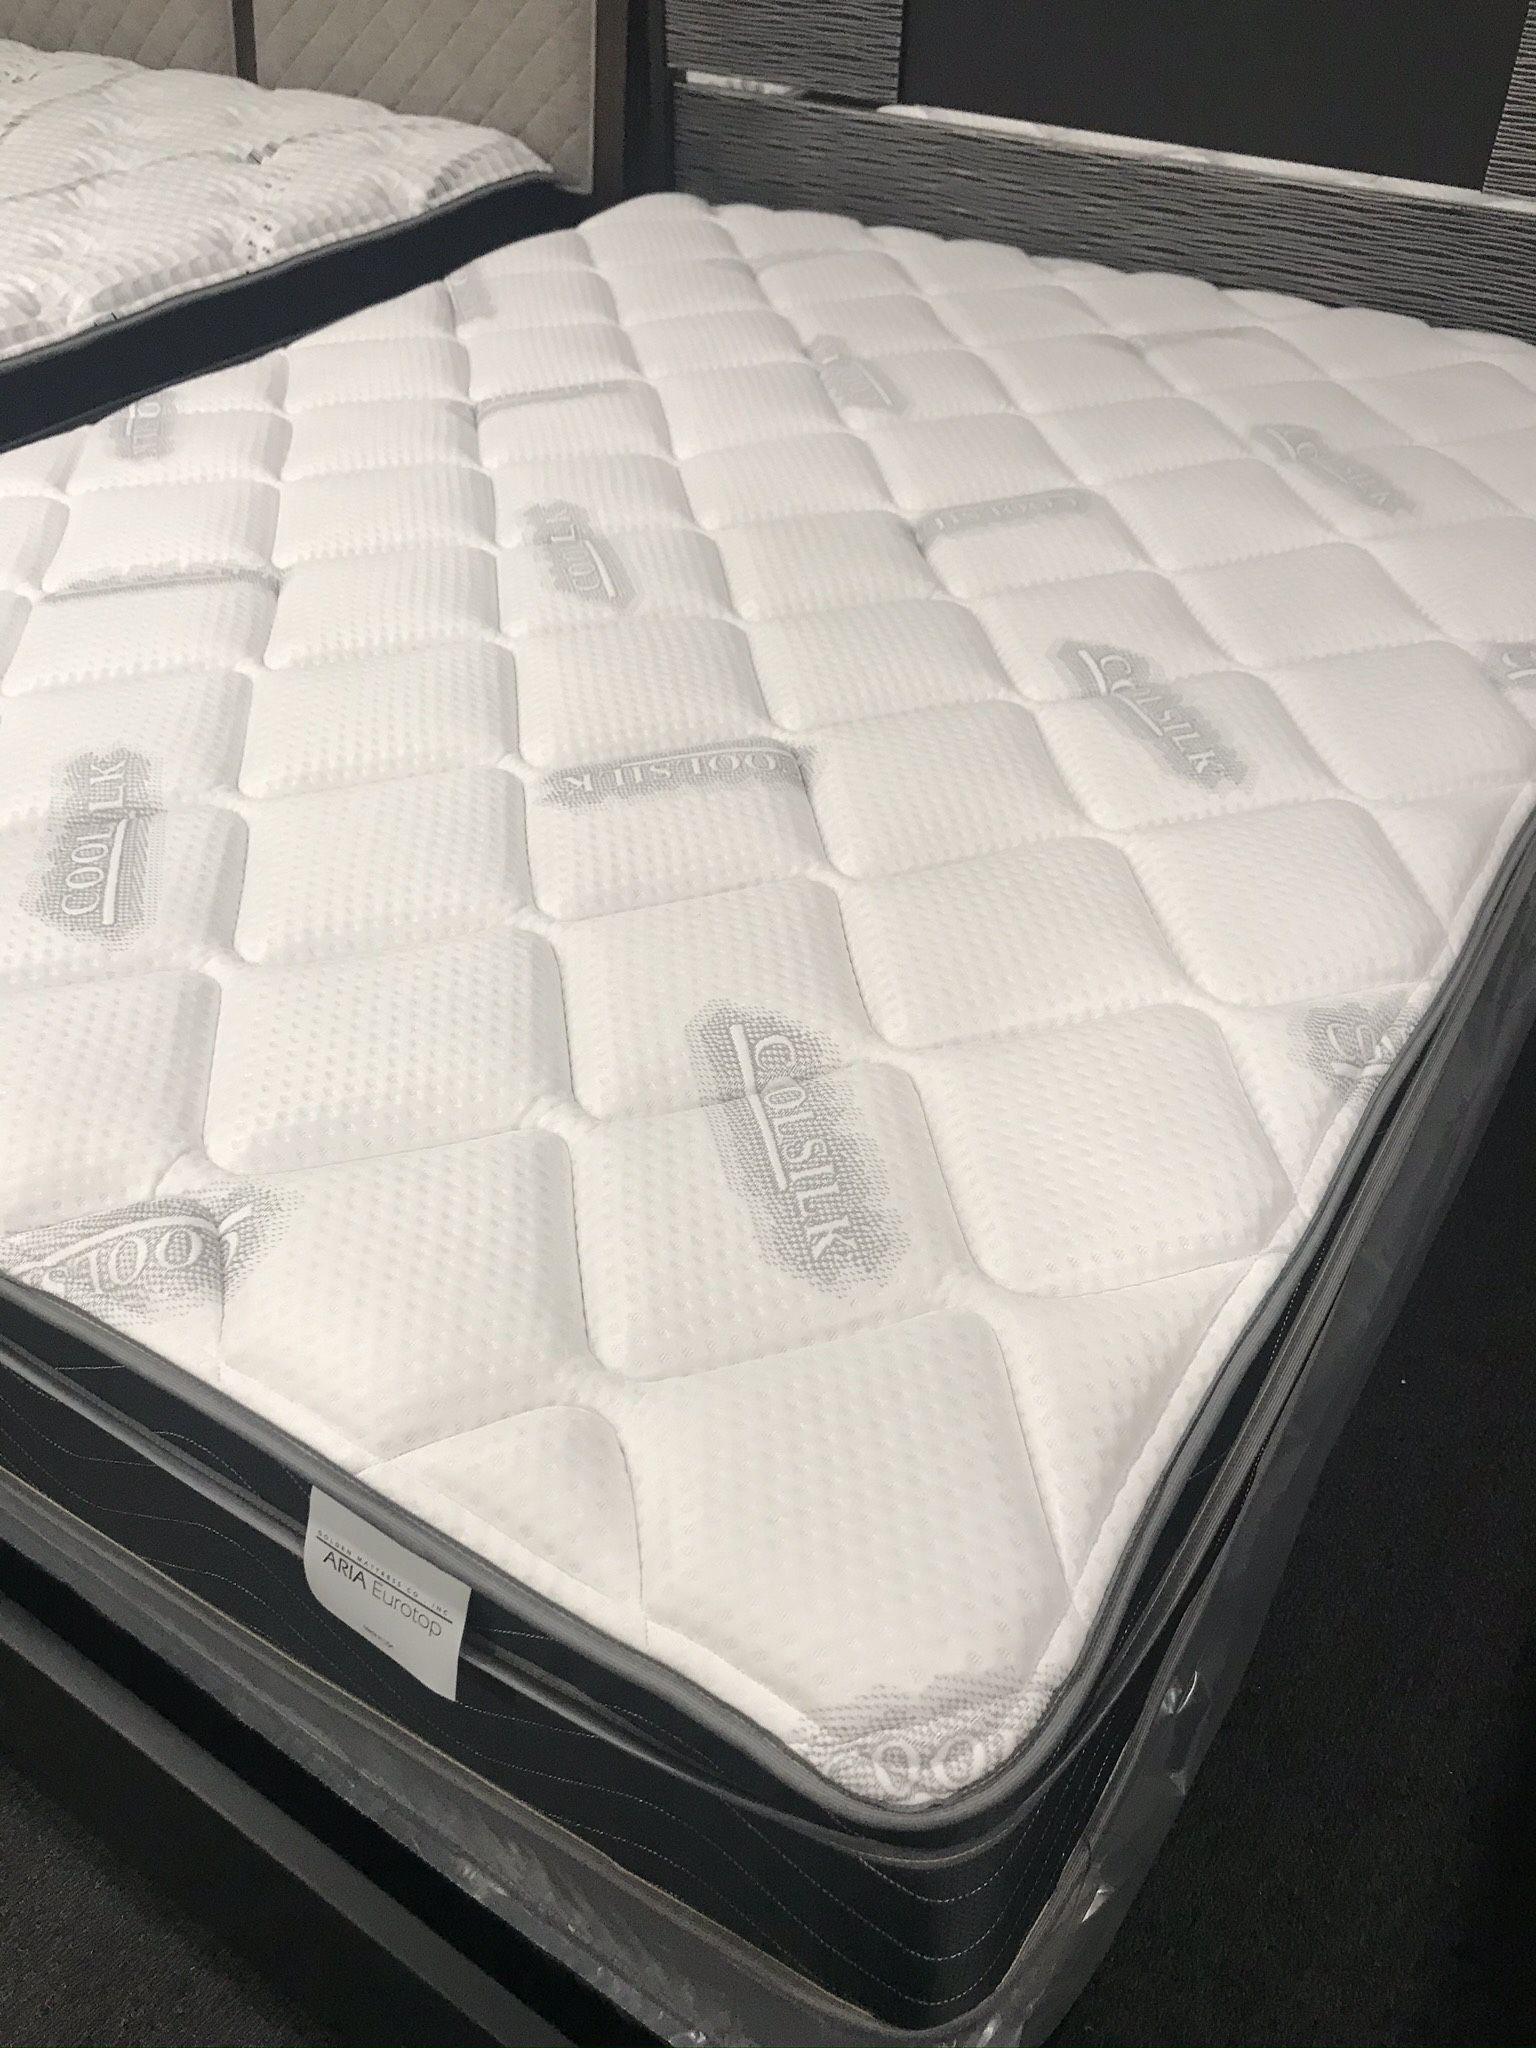 (JUST $54 DOWN) Brand new Plush Euro Top Queen Mattress (Financing & Delivery Available)